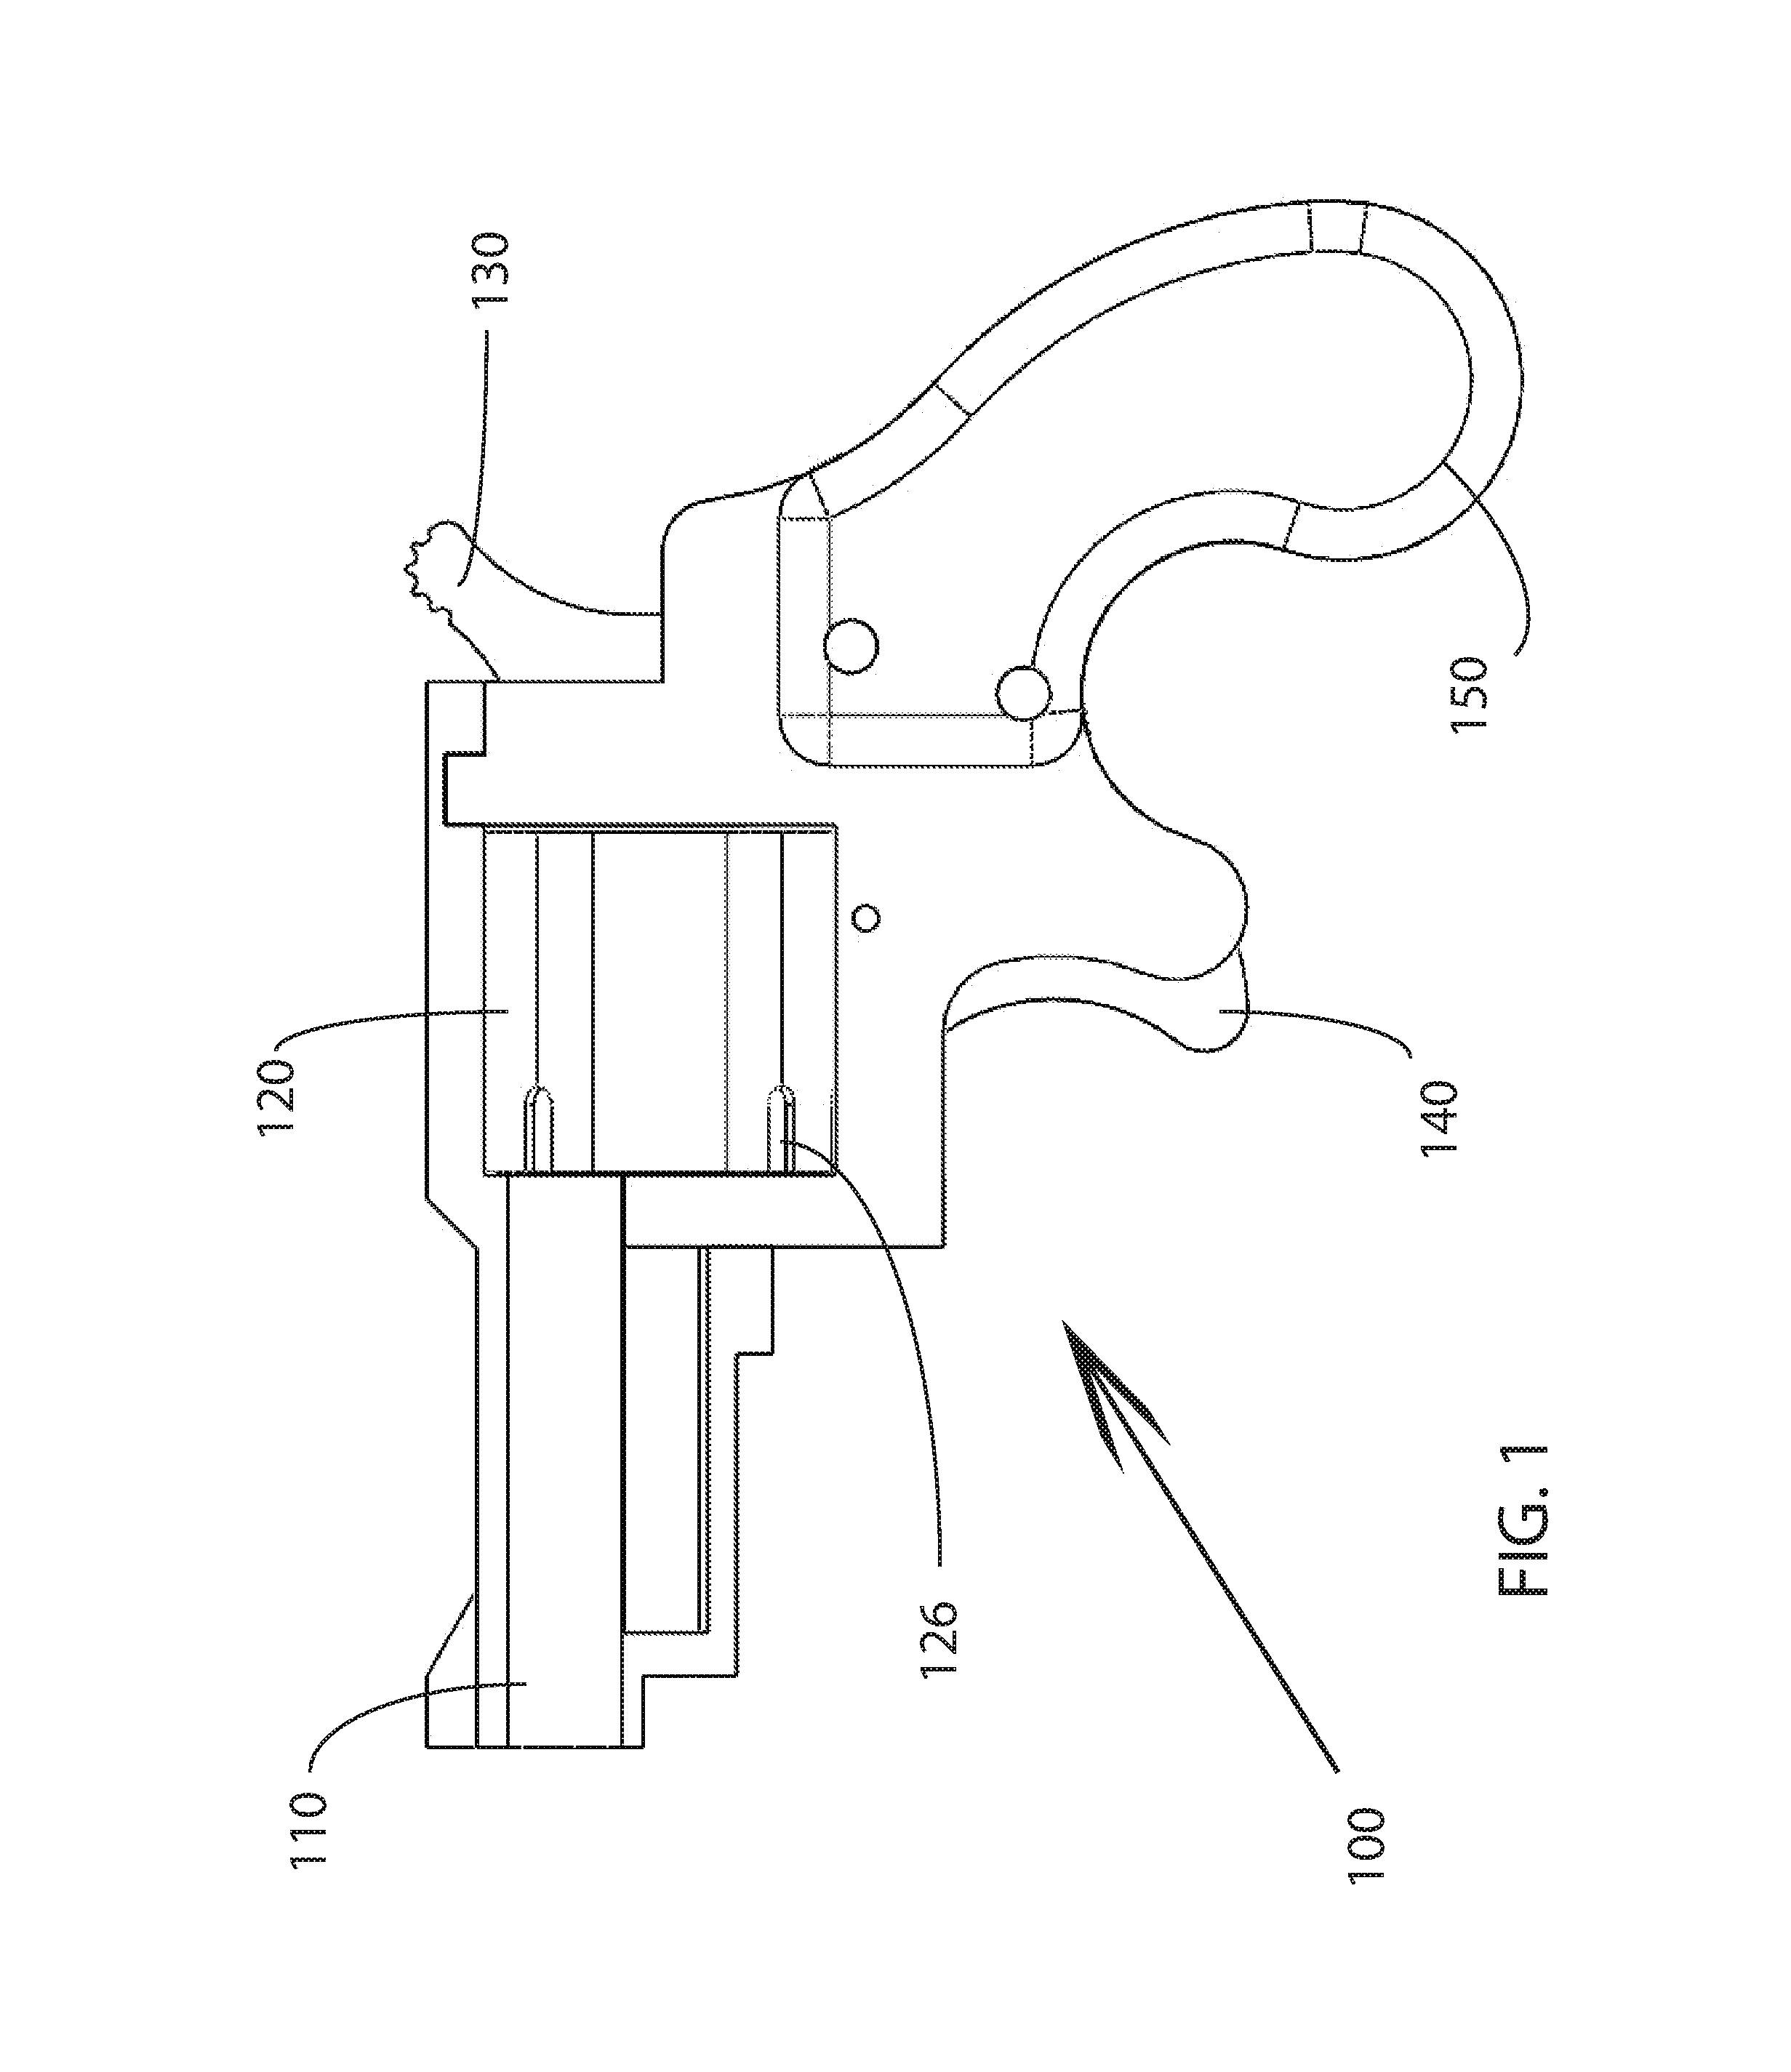 Extendable Tang for a Firearm